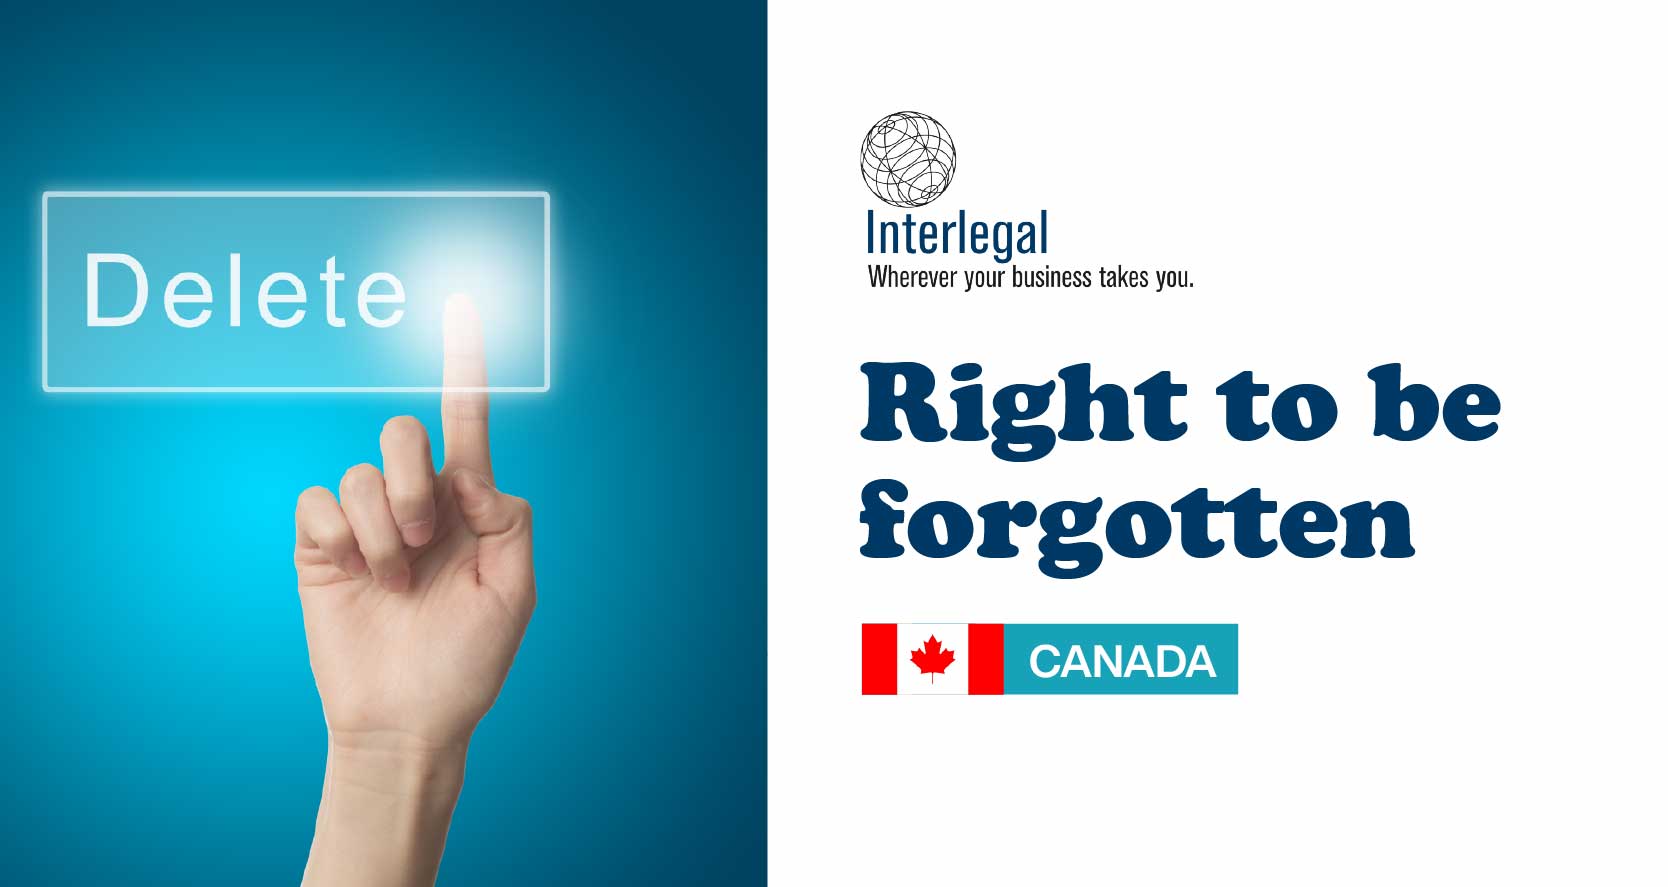 Right to be forgotten in Canada